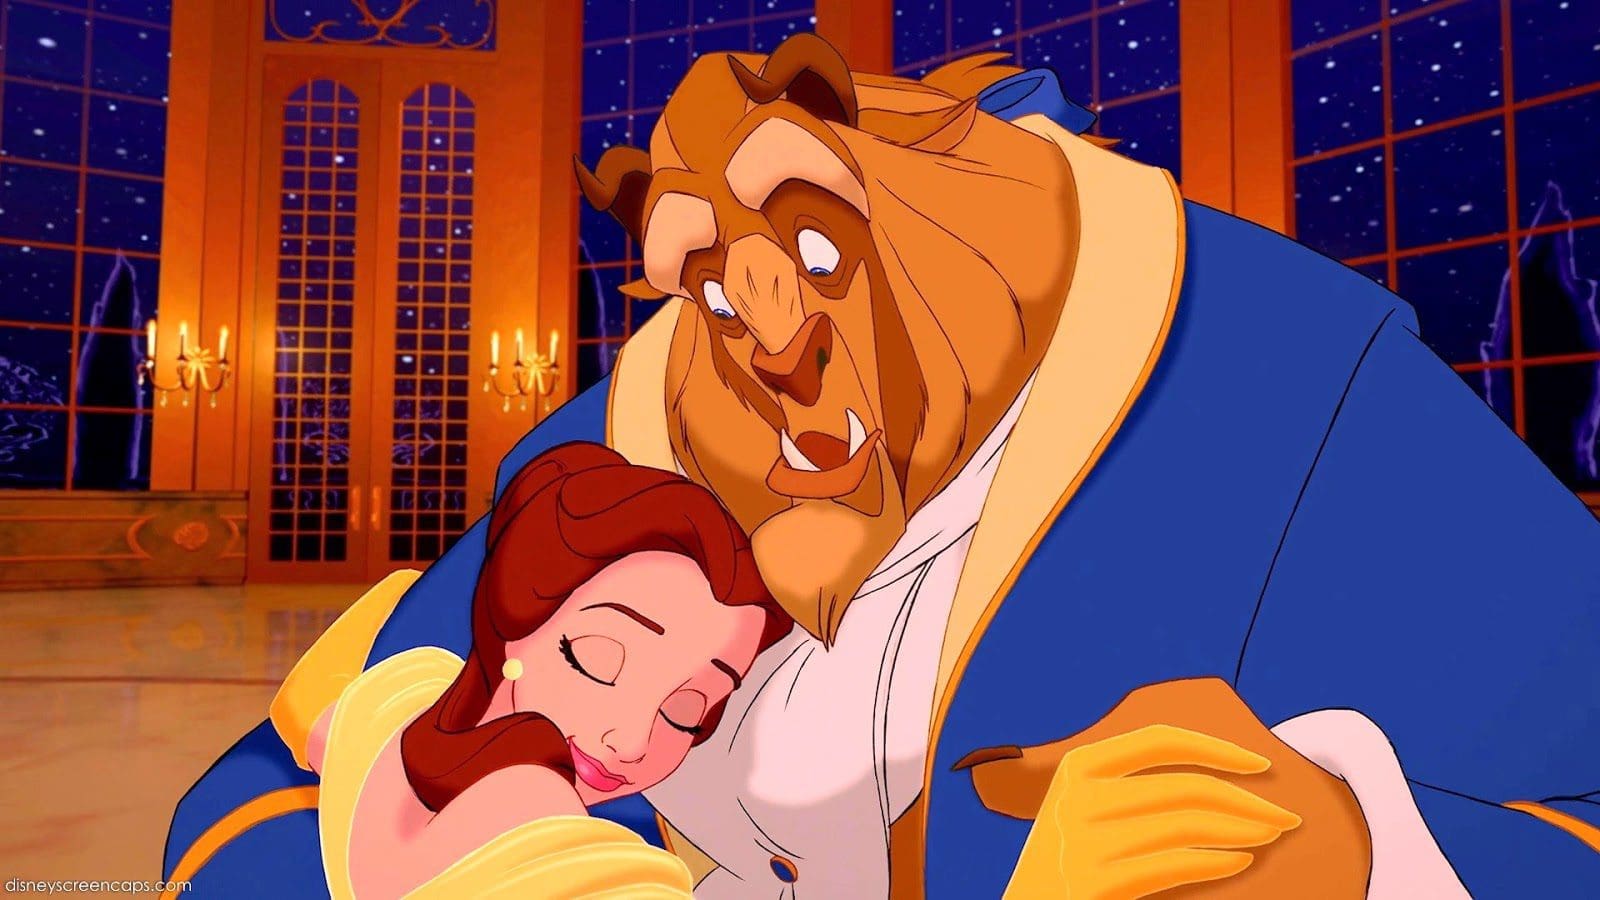 beauty and the beast91